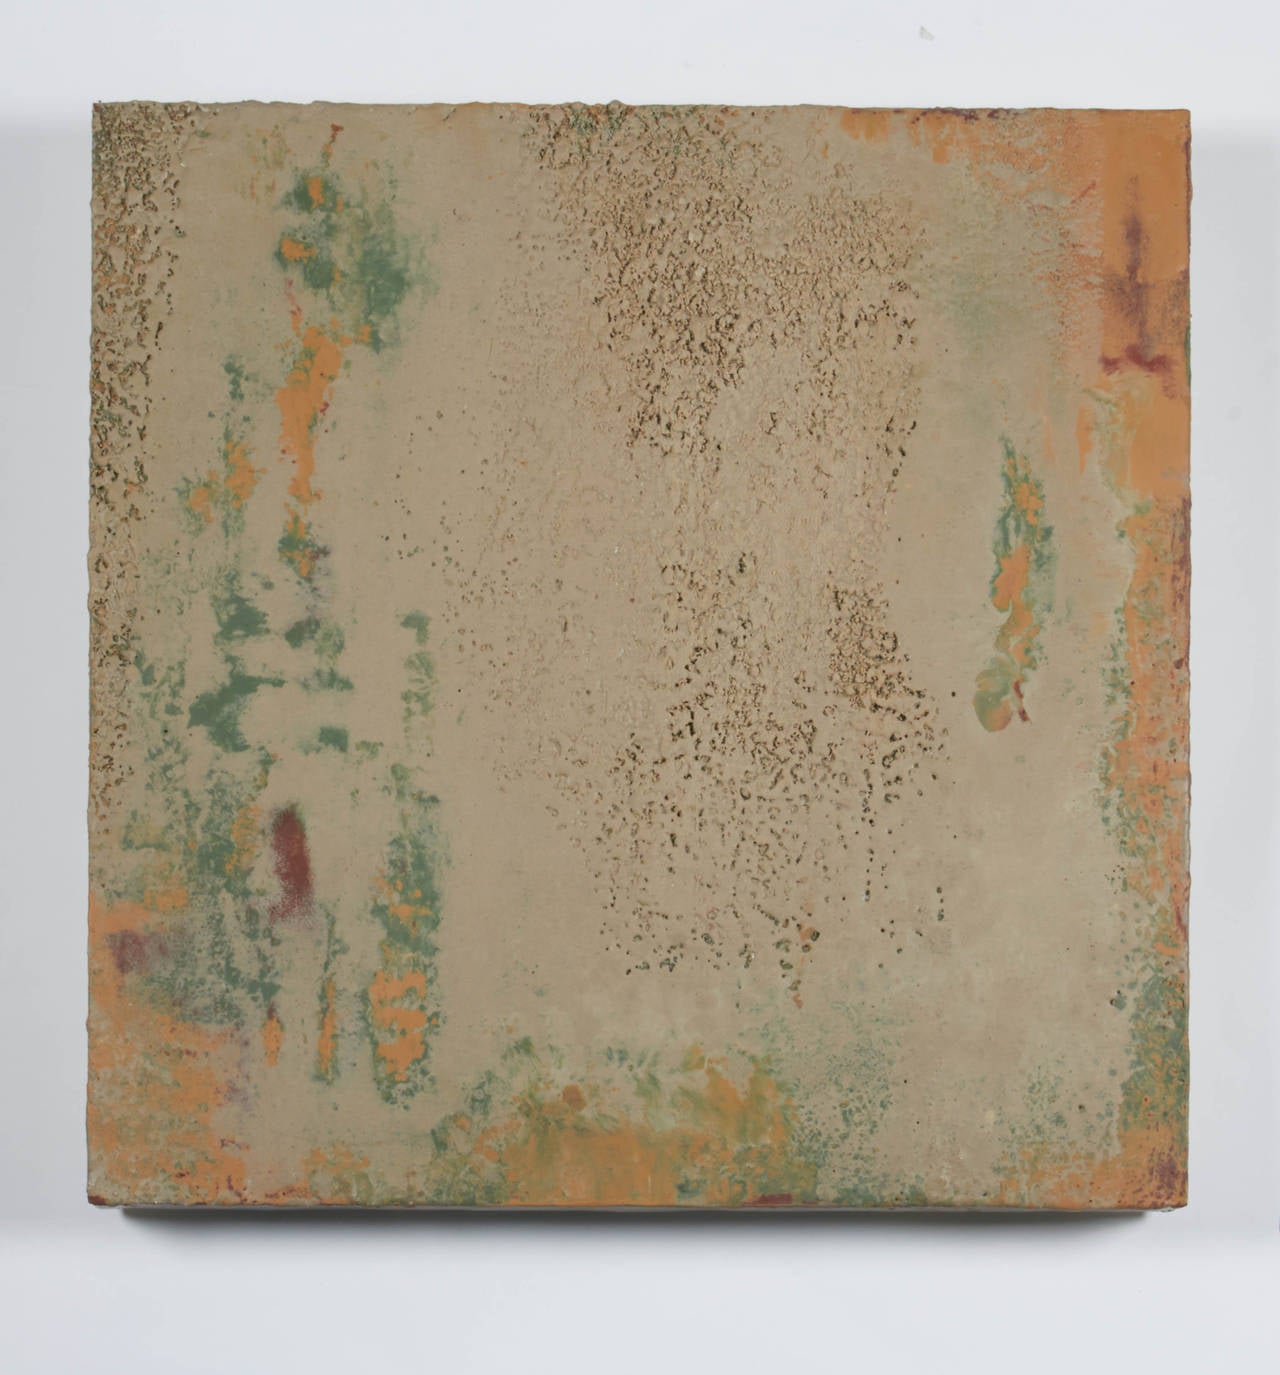 Modern Richard Hirsch Encaustic Painting of Nothing Series, circa 2010 - 2012 For Sale